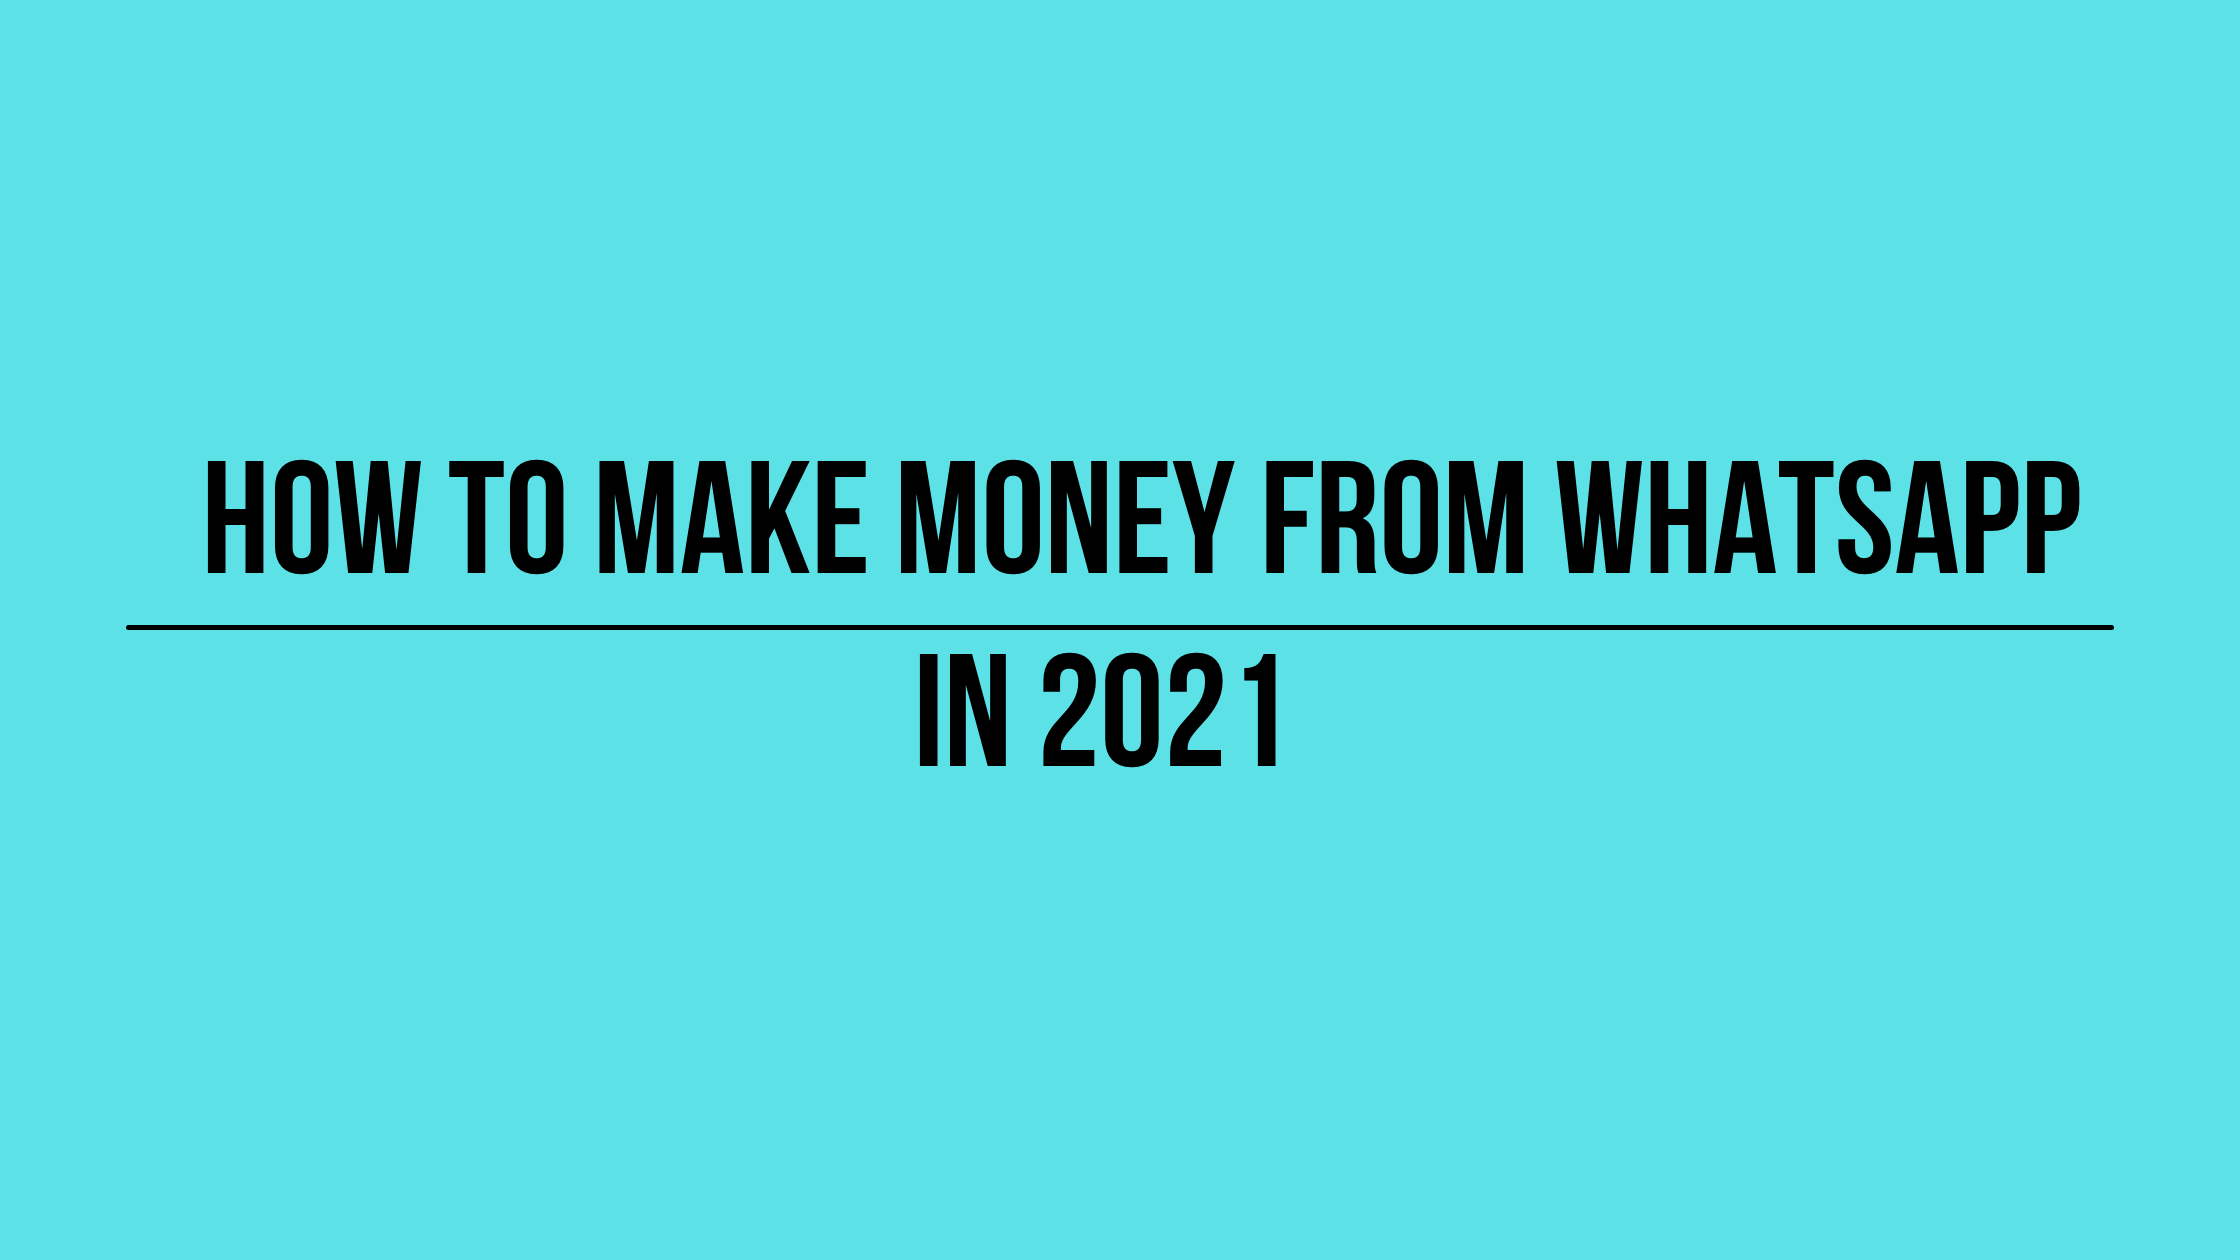 How to Make Money from Whatsapp in 2021